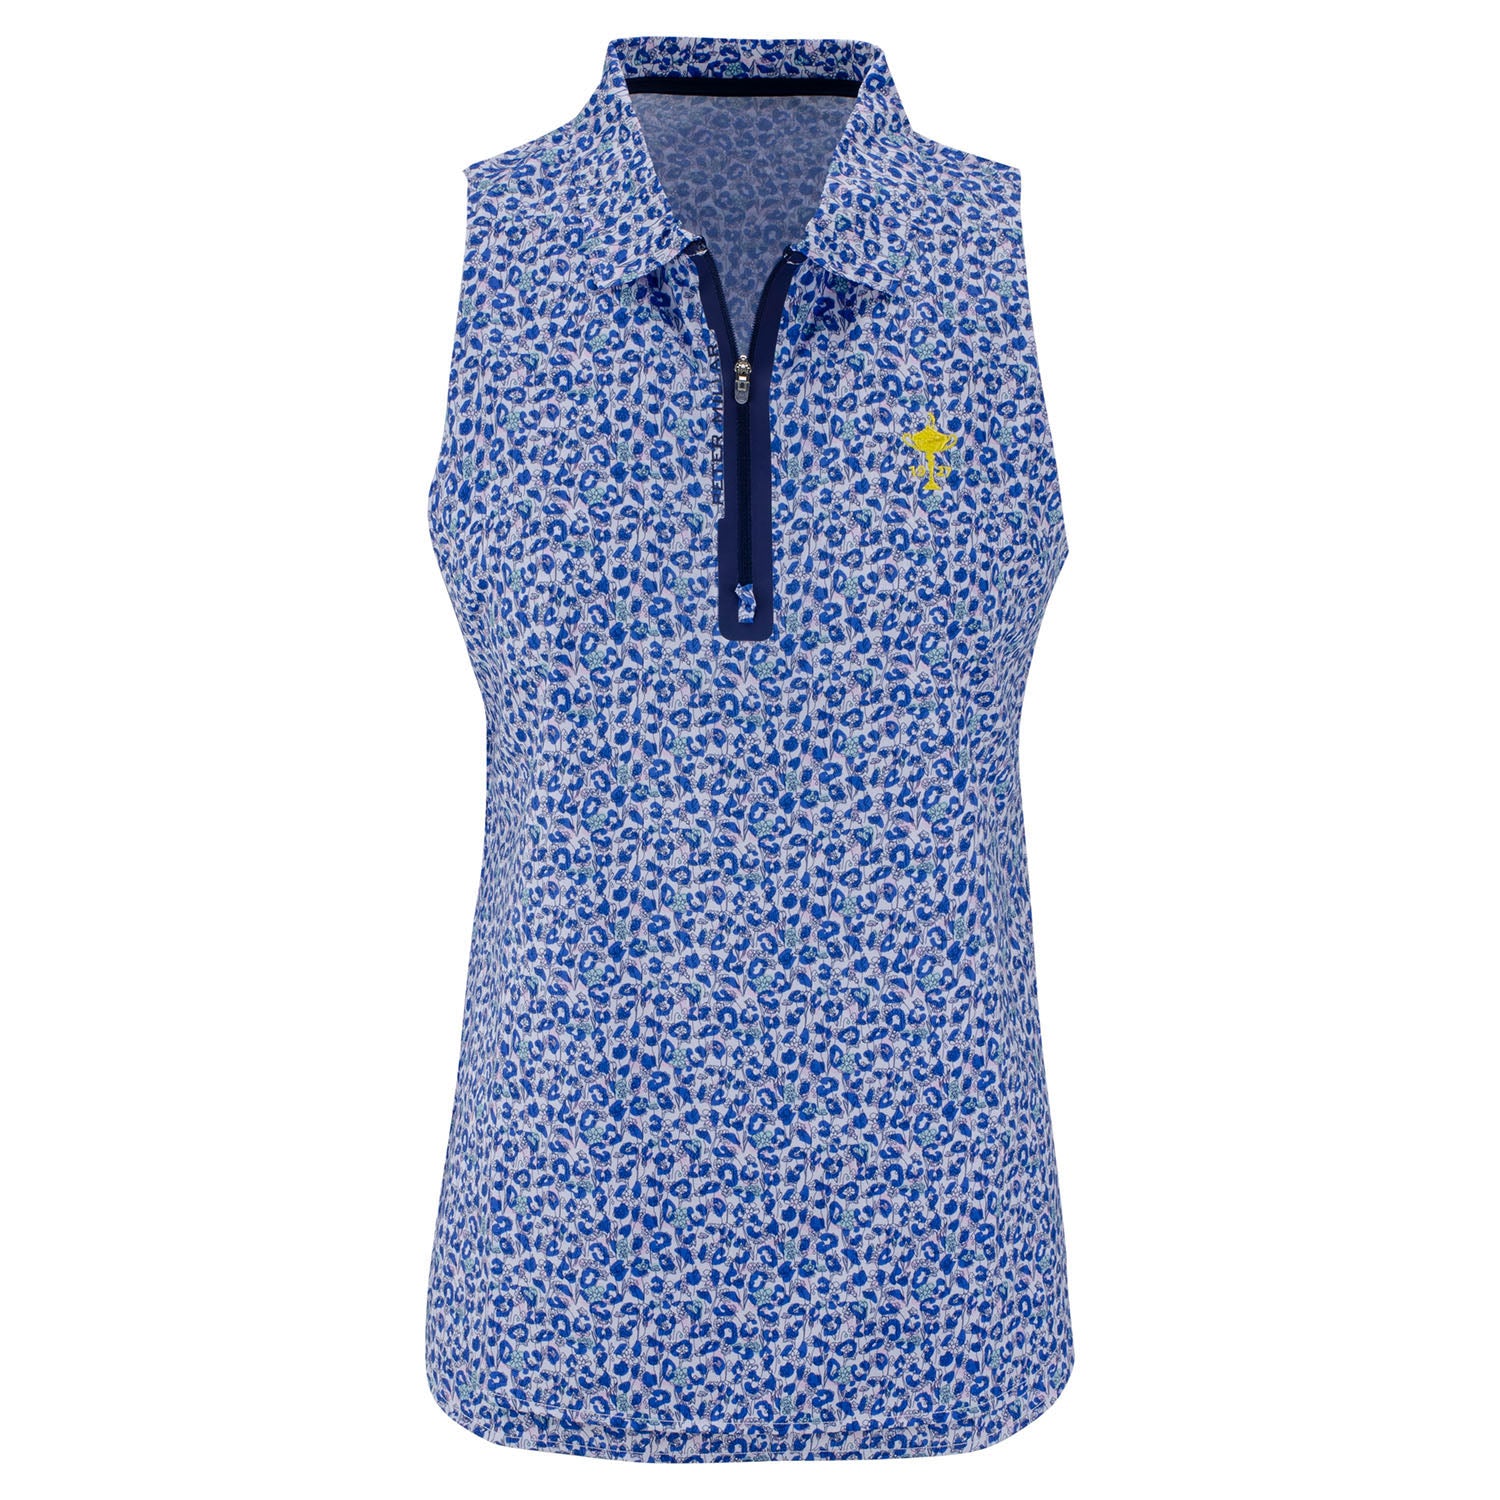 Ryder Cup Peter Millar Women's Carner Zip Neck Polo in Blue- Front View